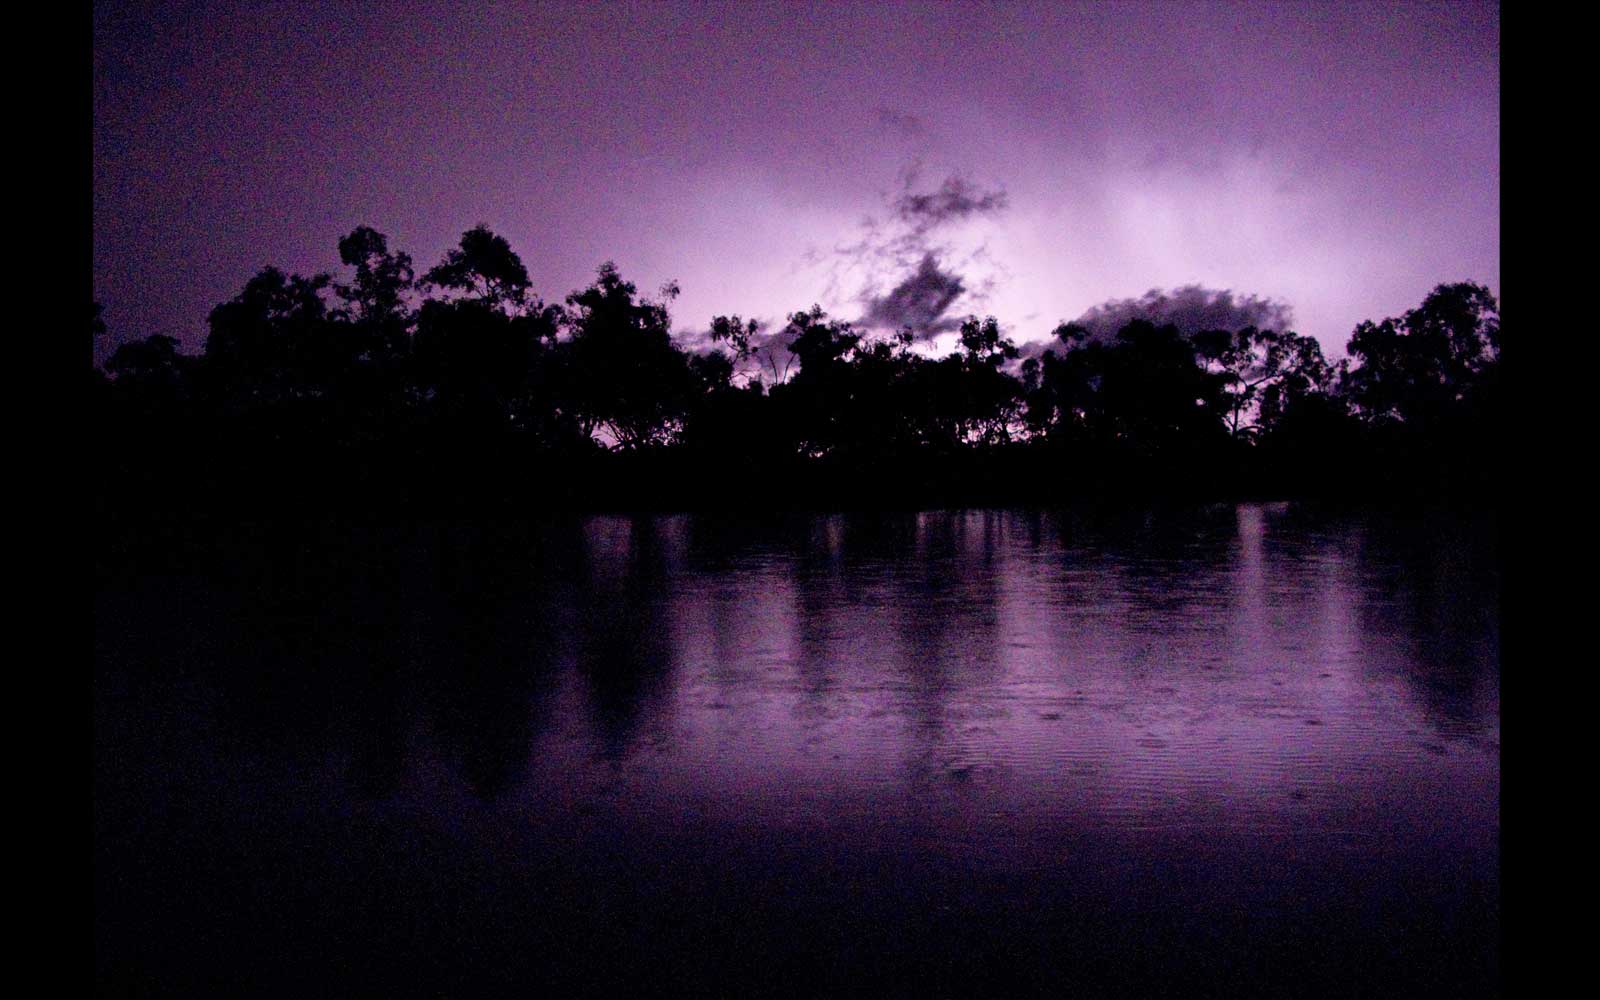 Midnight electrical storm. Currawinya National Park